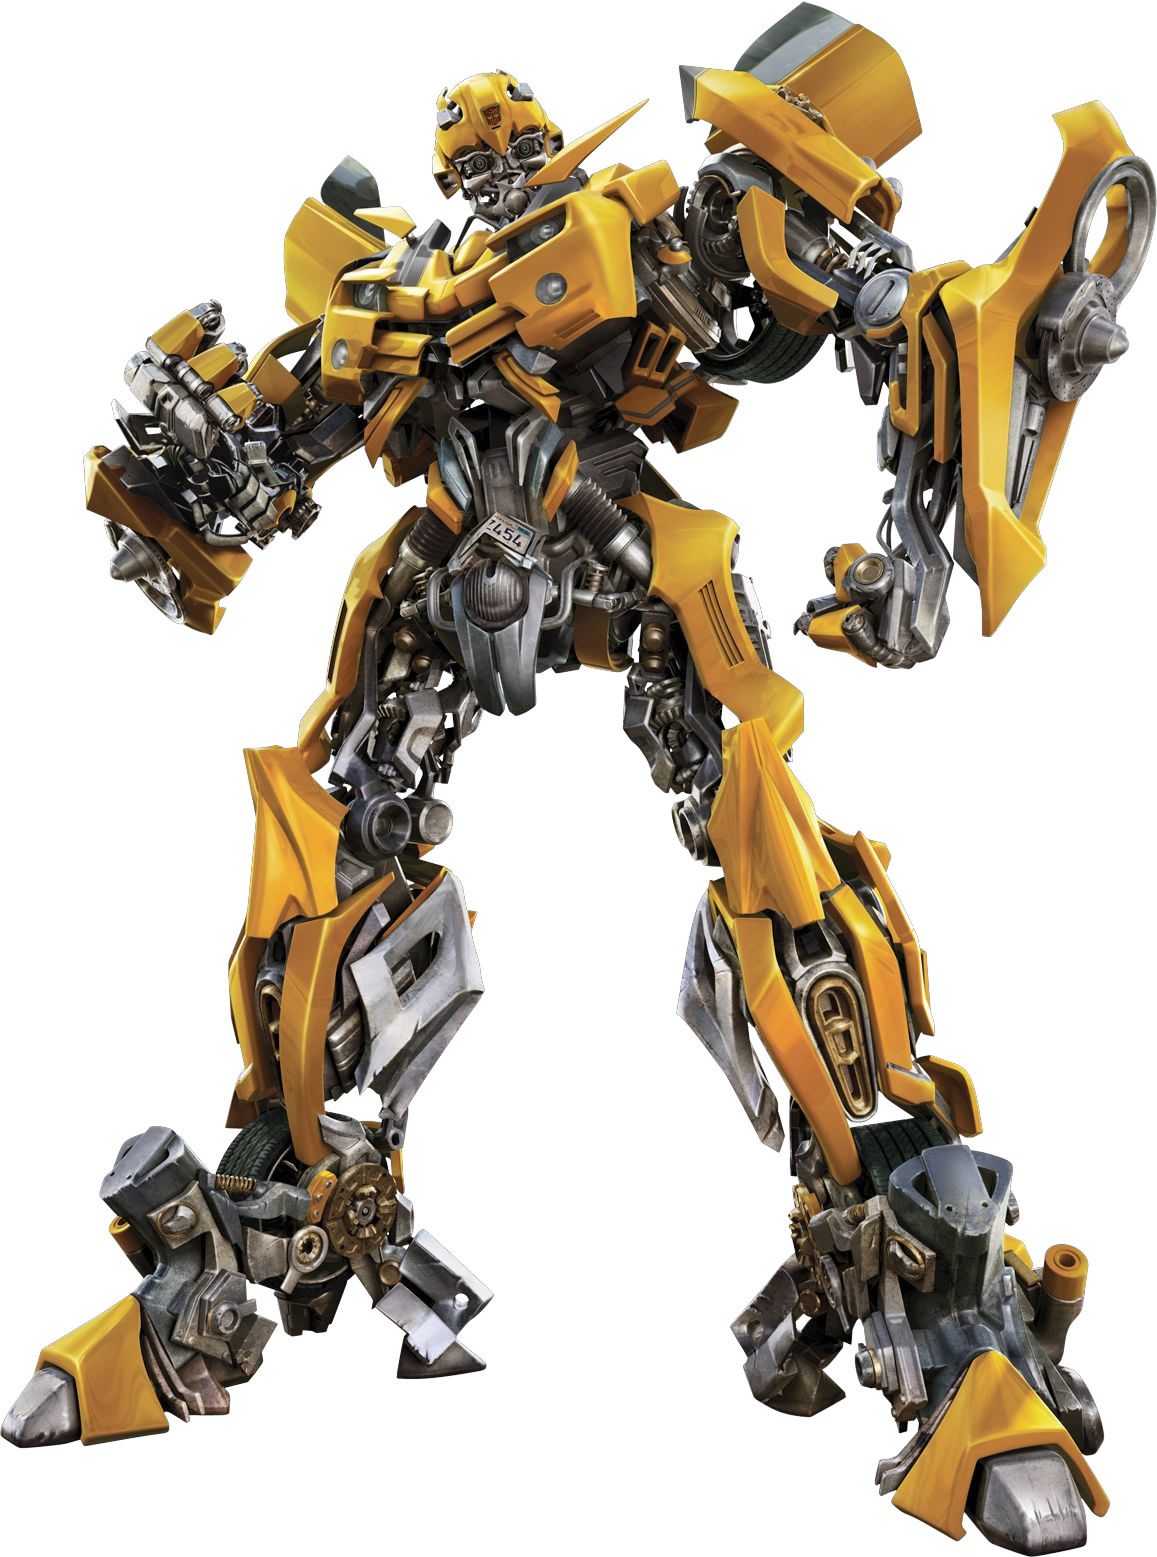 Bumblebee transformers wallpaper - High Quality and other